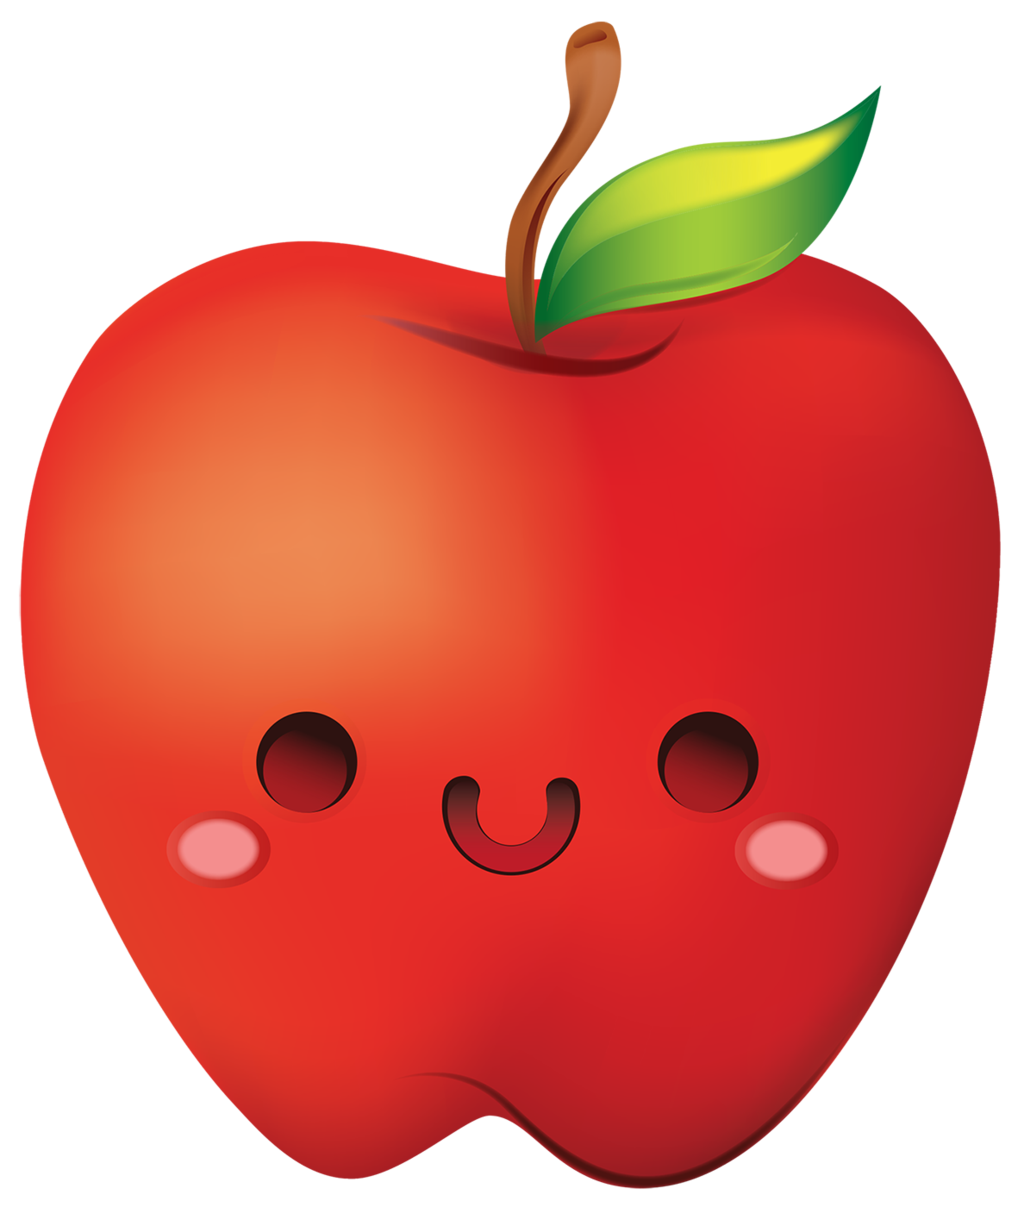 Apple Cartoon Pictures | Free Download Clip Art | Free Clip Art ...